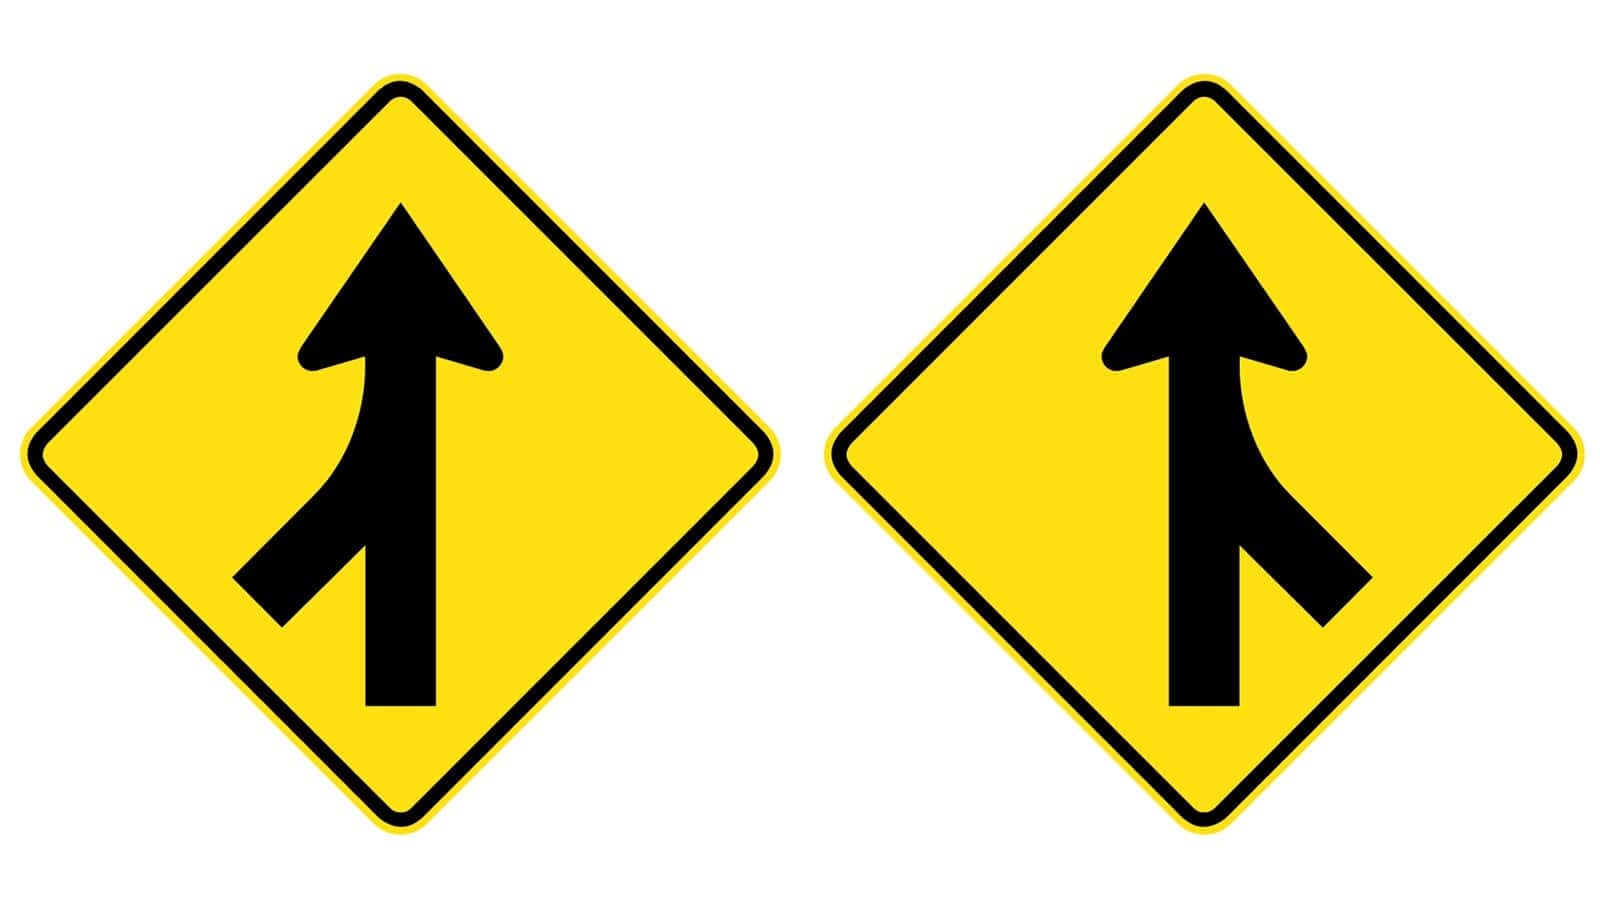 Merging Traffic from Left Right Sign